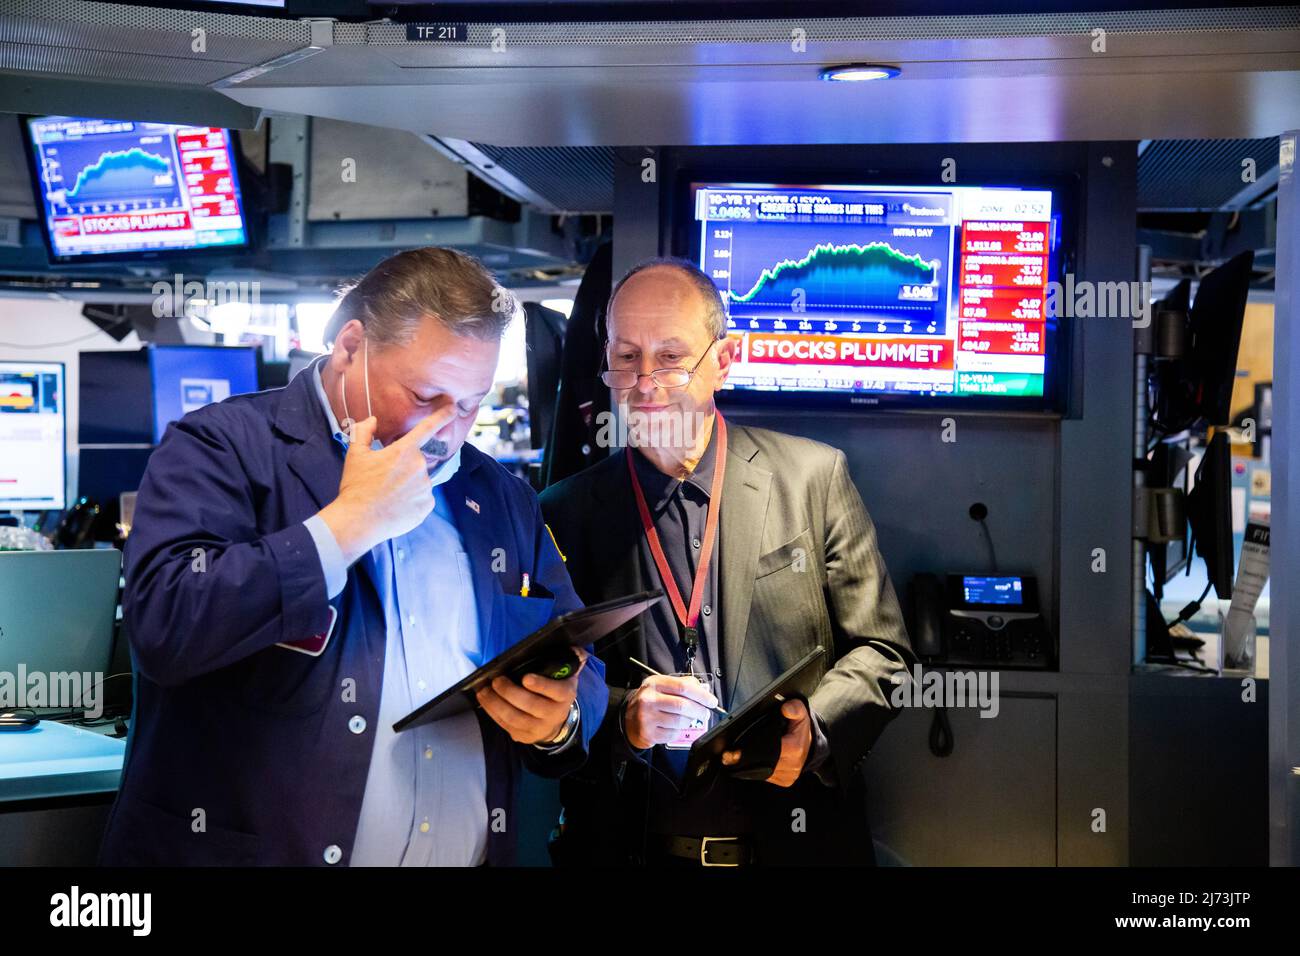 (220506) -- NEW YORK, May 6, 2022 (Xinhua) -- Traders work on the floor of the New York Stock Exchange (NYSE) in New York, the United States, May 5, 2022. U.S. stocks plunged on Thursday as heavy selling intensified on Wall Street.   The Dow Jones Industrial Average tumbled 1063.09 points, or 3.12 percent, to 32,997.97. The S&P 500 fell 153.30 points, or 3.56 percent, to 4,146.87. The Nasdaq Composite Index shed 647.17 points, or 4.99 percent, to 12,317.69. (Photo by Michael Nagle/Xinhua) Stock Photo